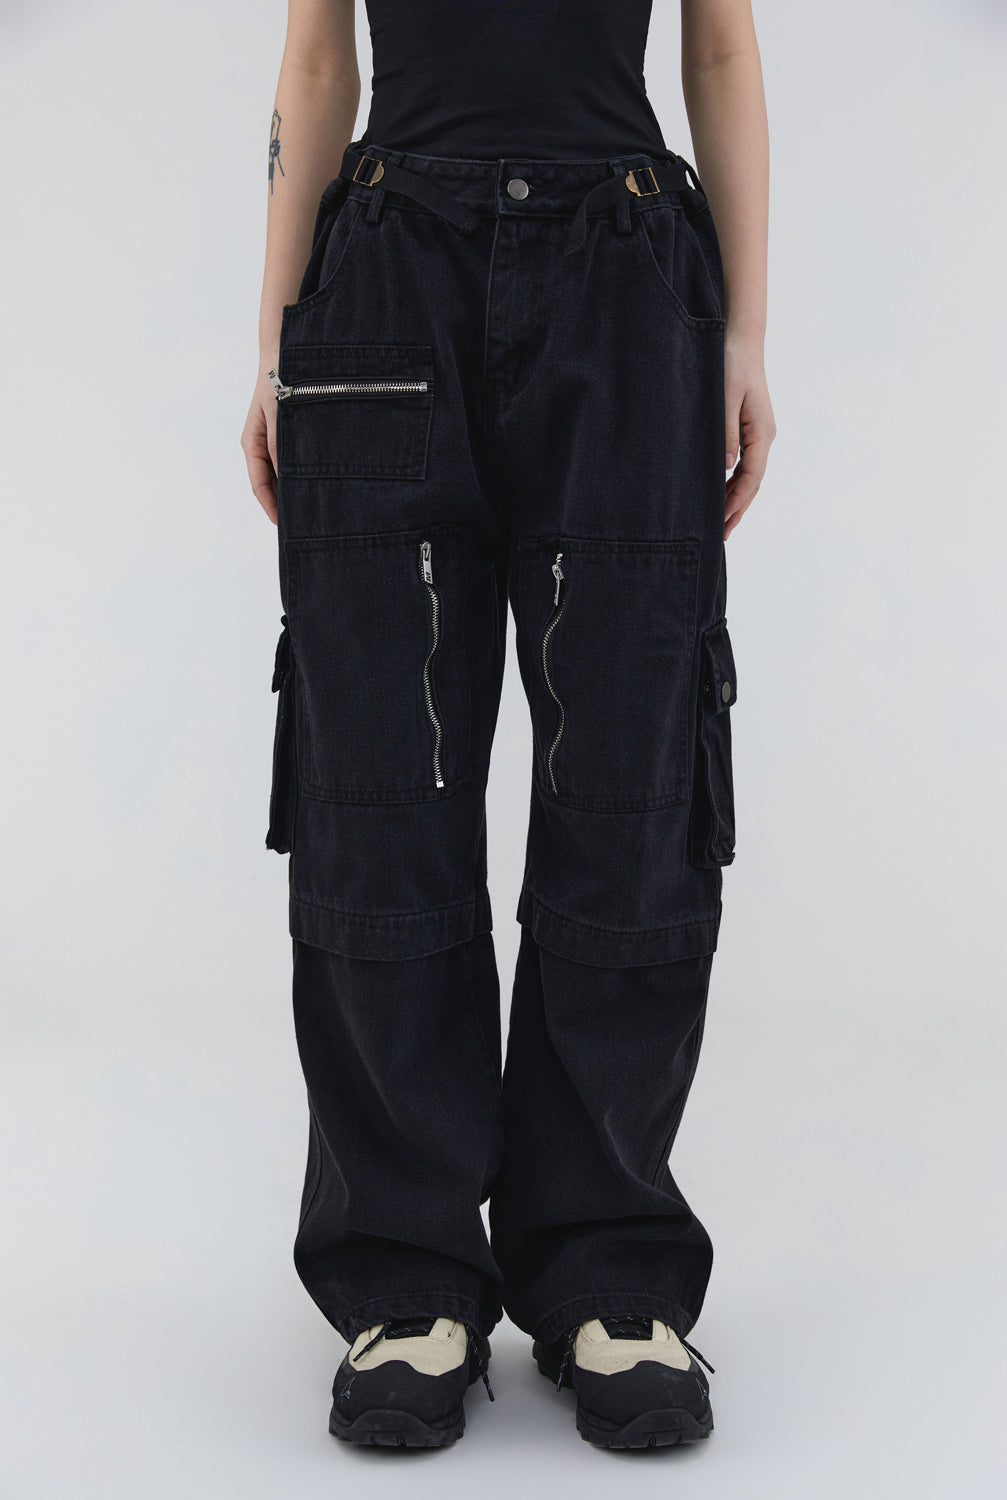 RELEASE DATE PANTS – Made Extreme